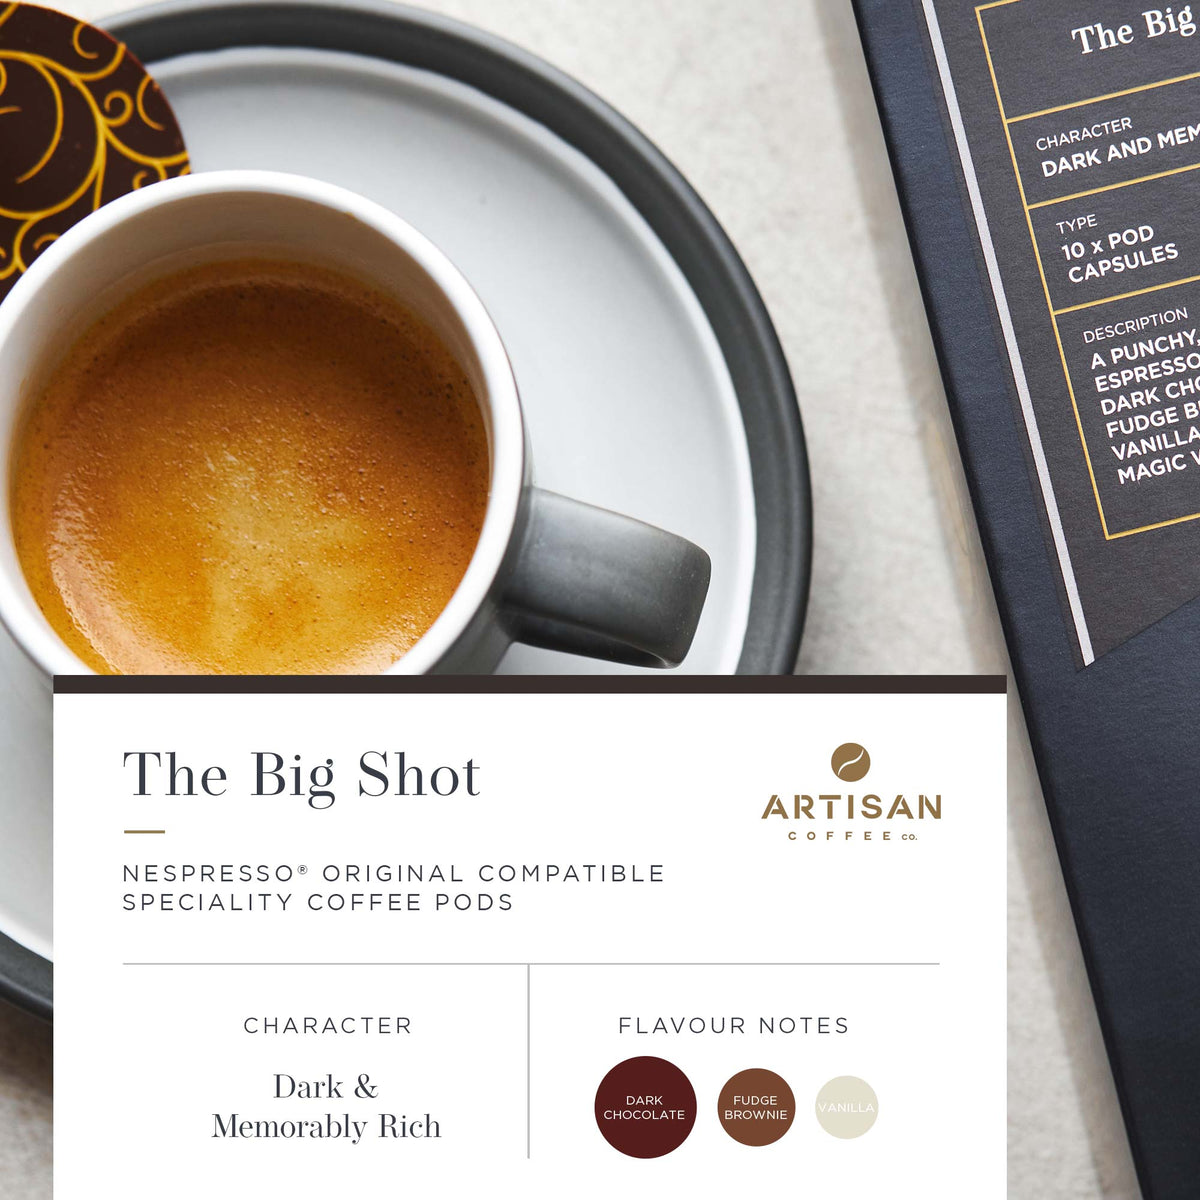 Artisan Coffee Co The Big Shot Pods Infographic Intro